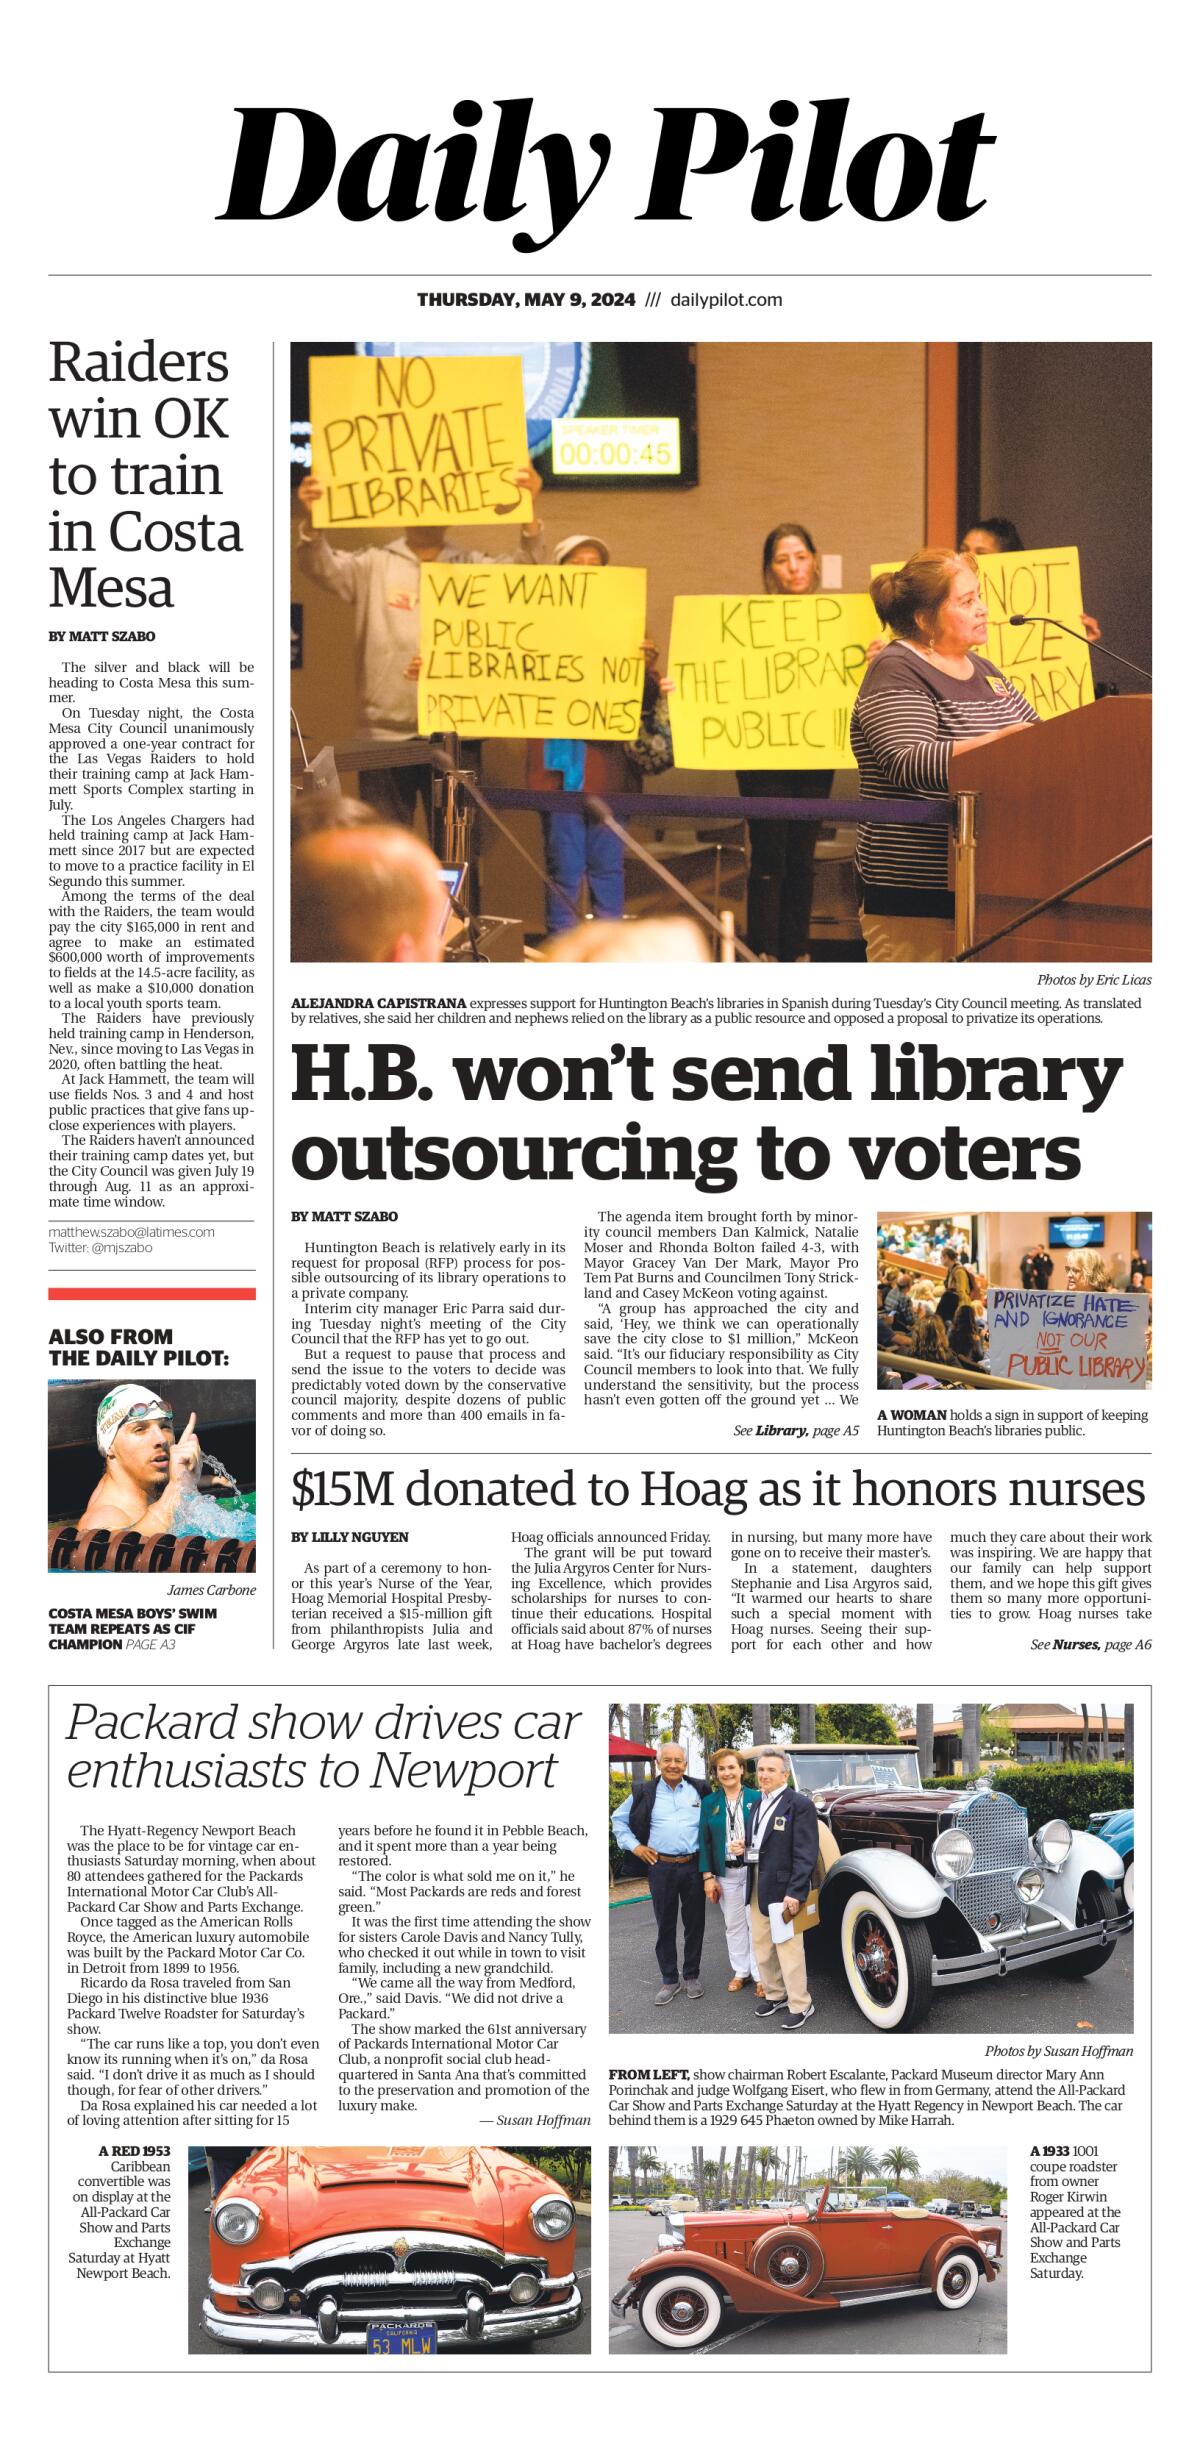 Front page of the Daily Pilot e-newspaper for Thursday, May 9, 2024.